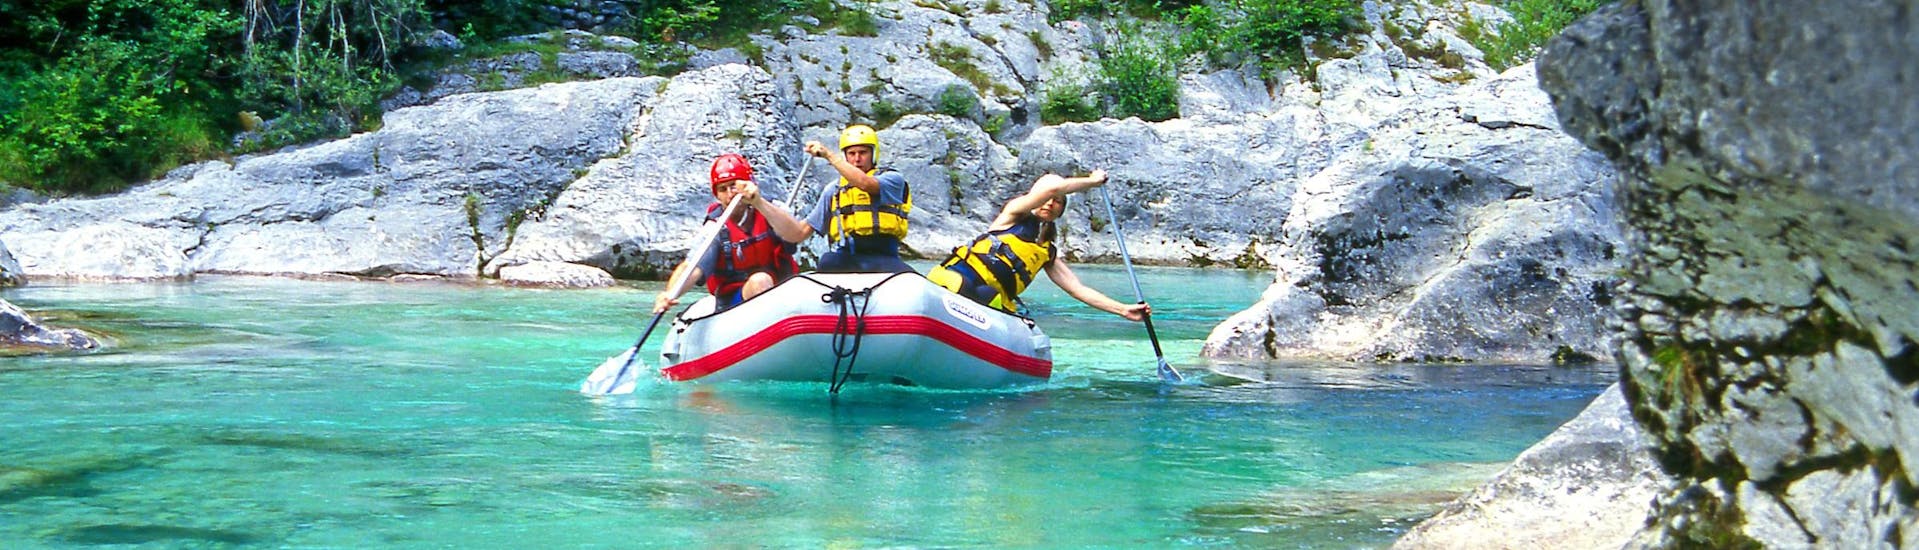 A group of friends having fun on a white water rafting tour in the rafting hotspot of Kobarid.